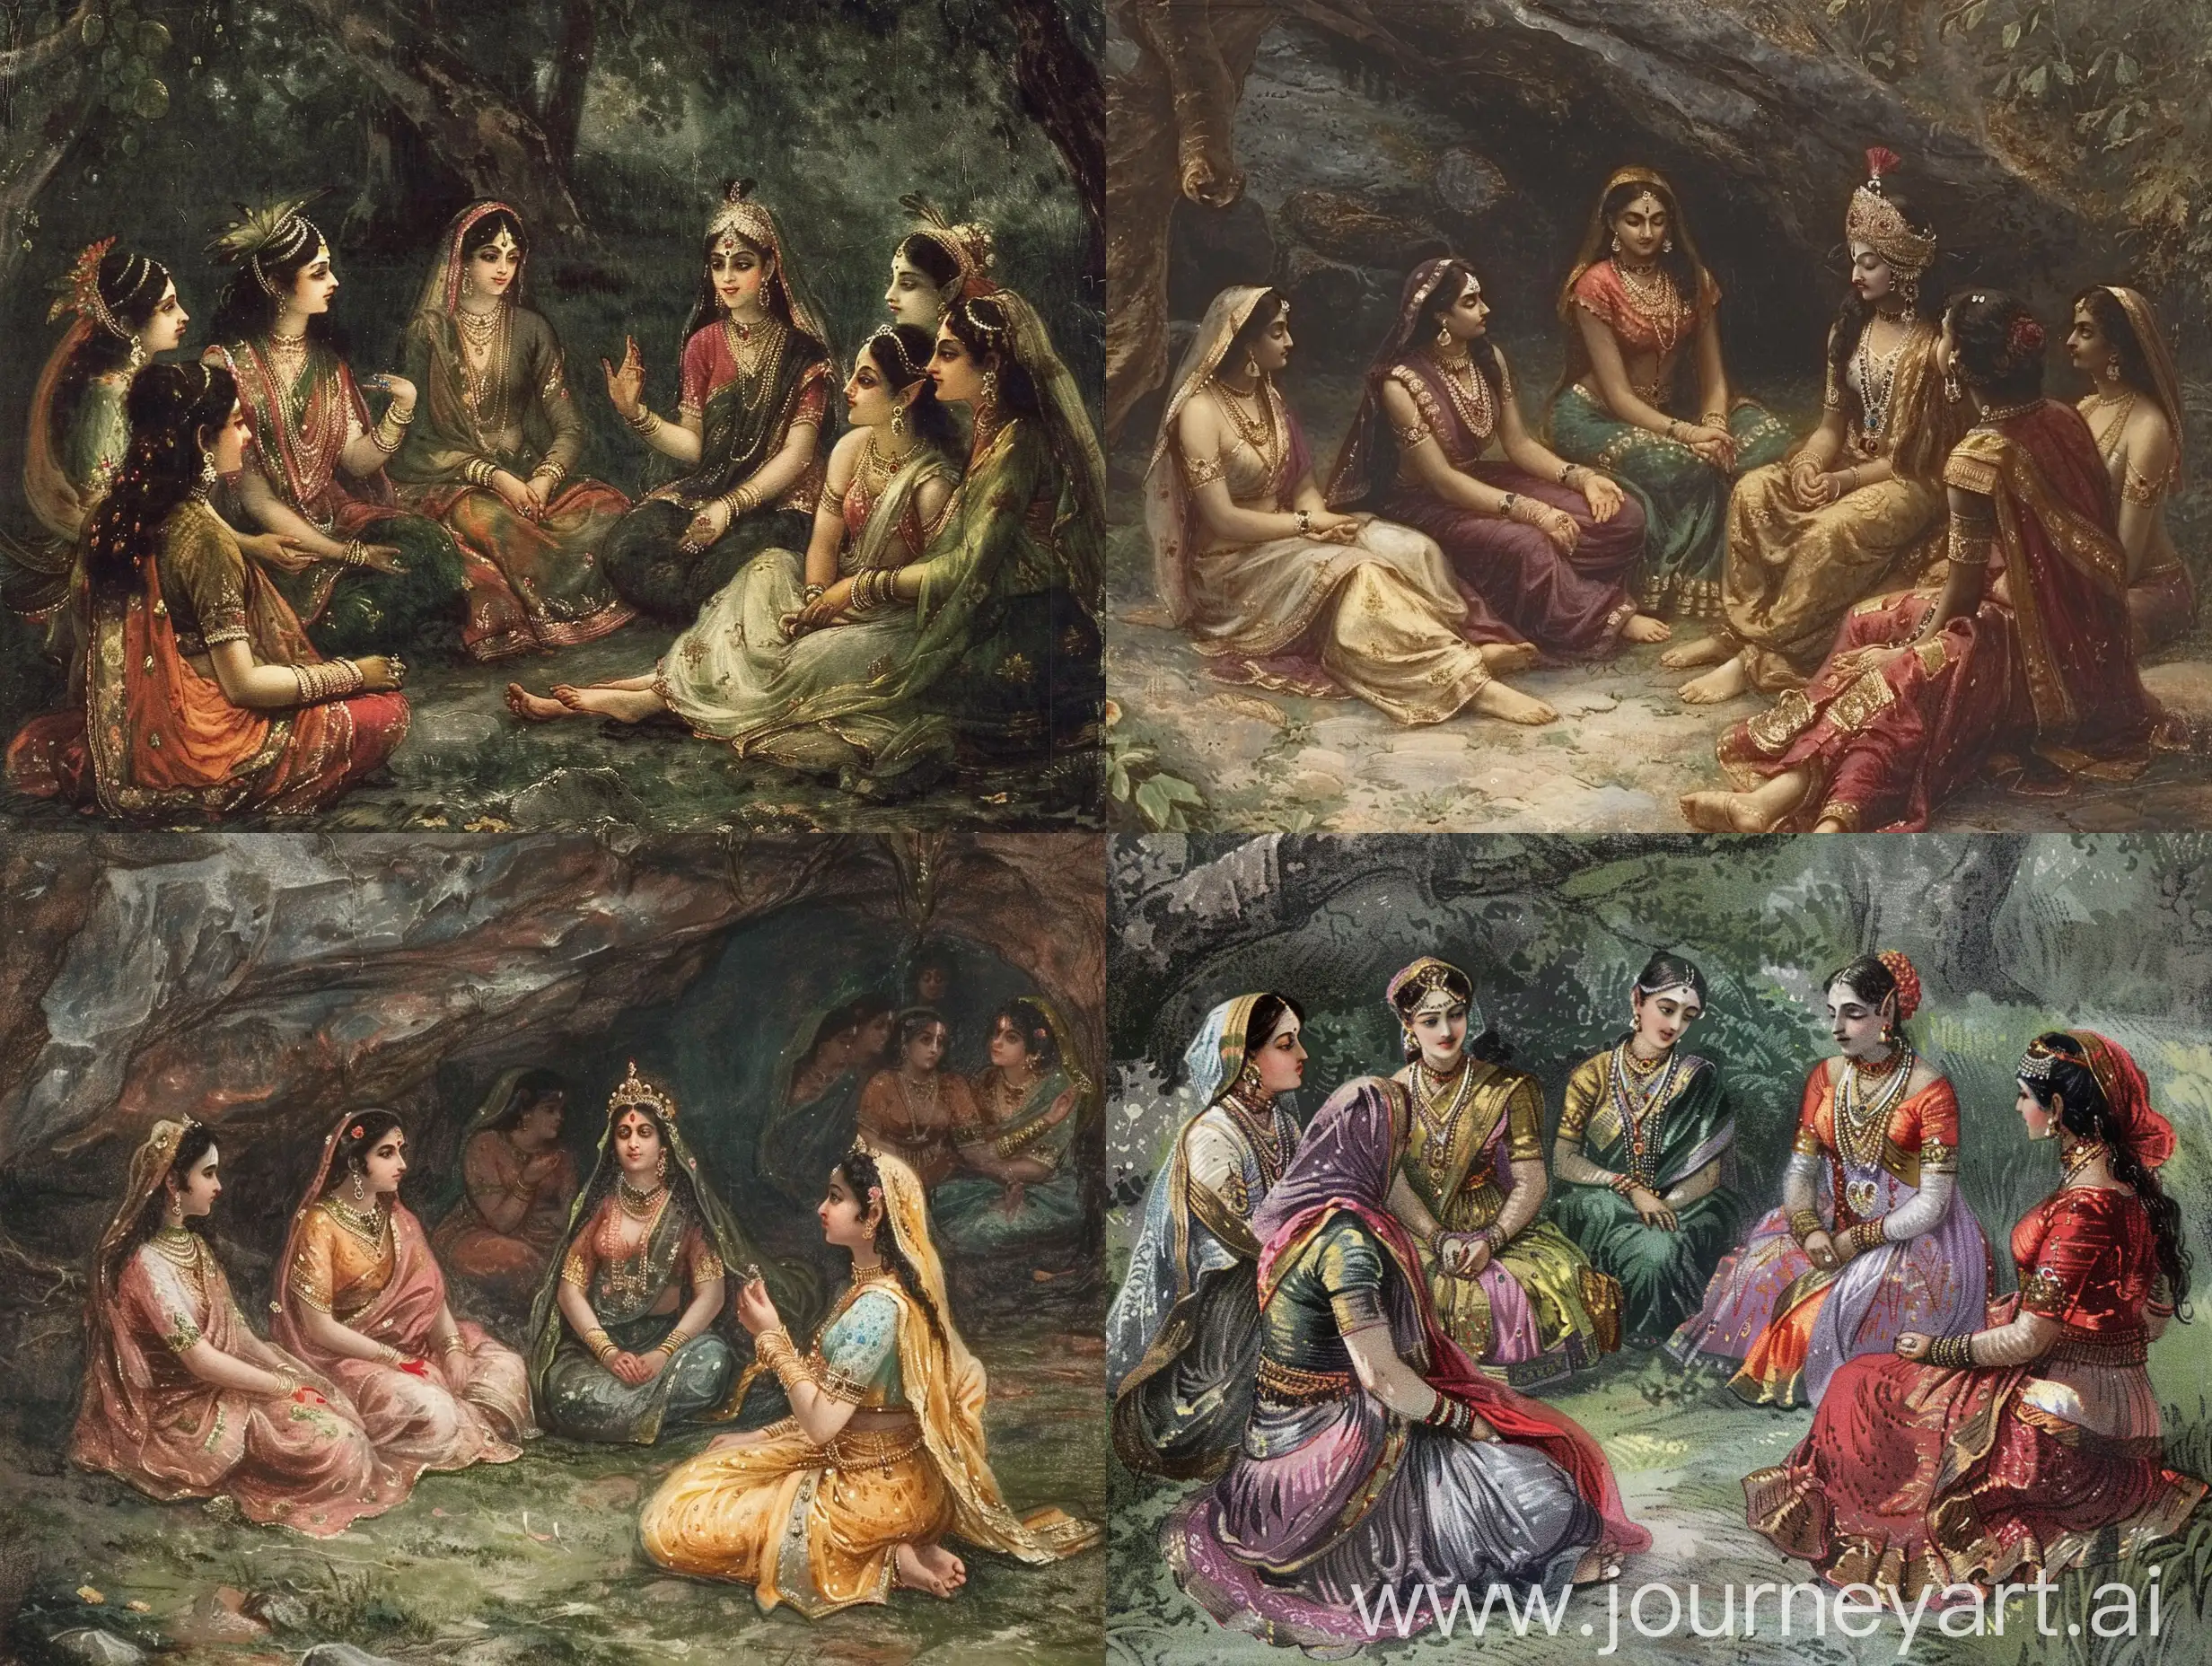 Indian-Fairy-Queen-Surrounded-by-Women-Fairies-in-Circle